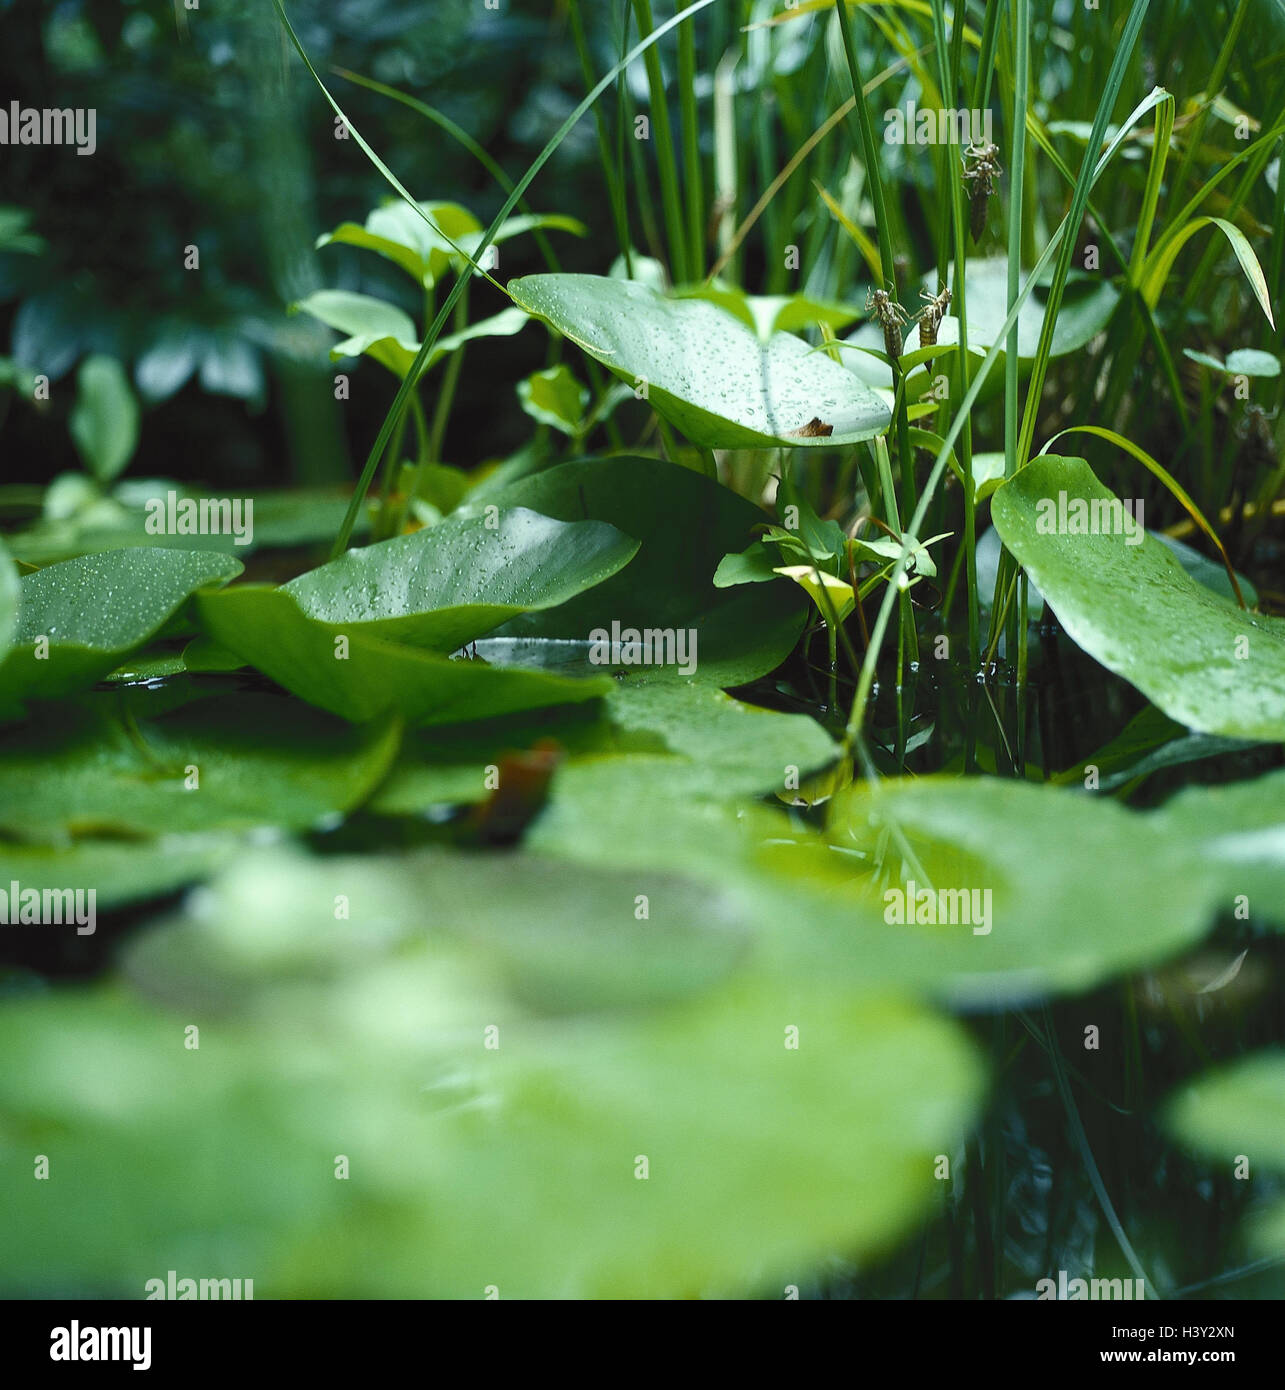 Pond, detail, water lily leaves, outside, nature, plants, water plants, Nymphaea, water lily plants, leaves, water, grass, close up Stock Photo